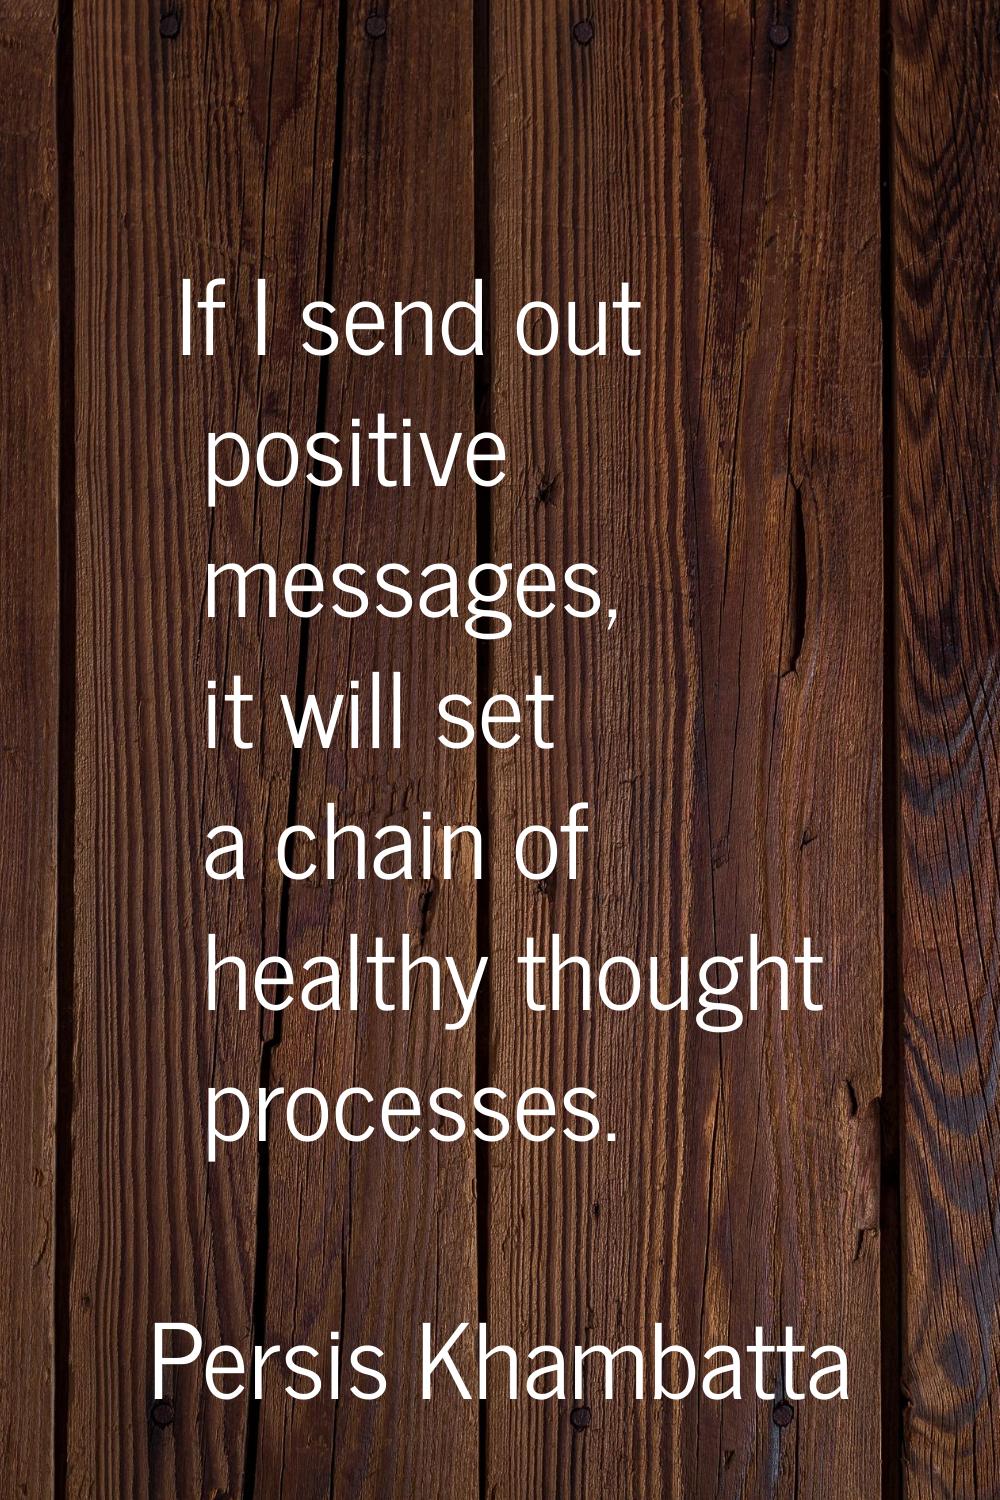 If I send out positive messages, it will set a chain of healthy thought processes.